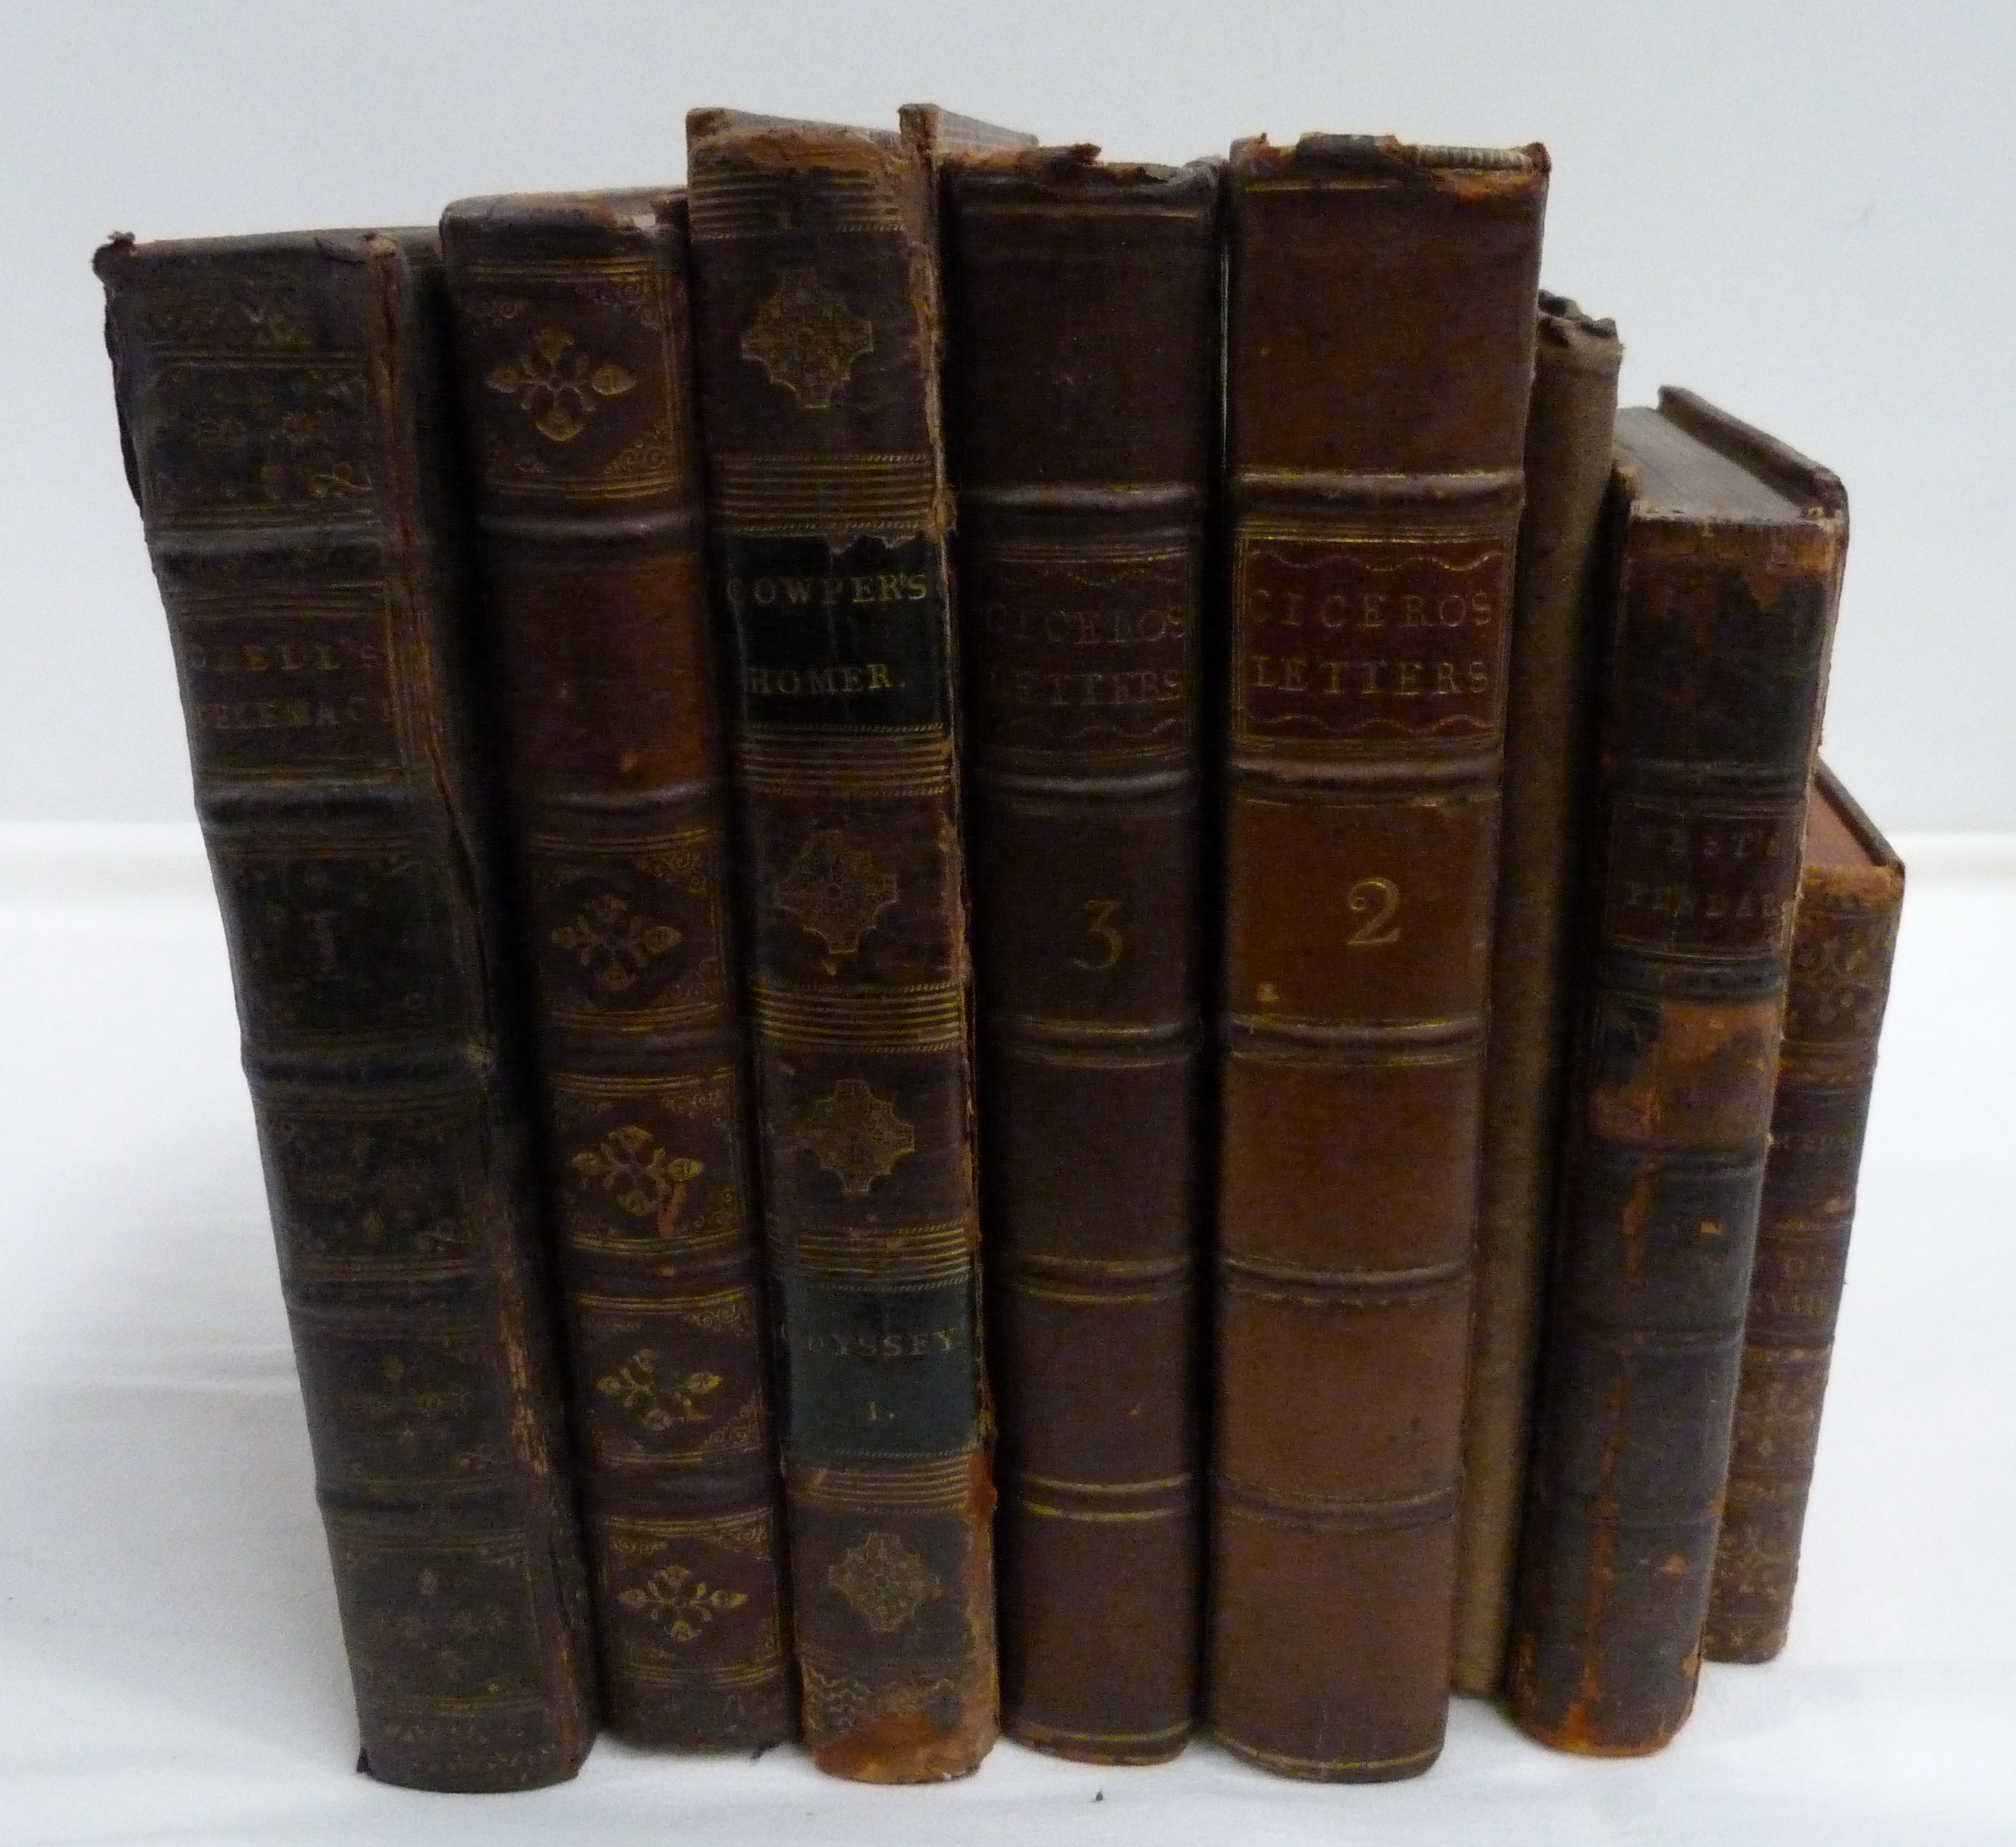 Classics.  8 mainly 18th cent. calf bound vols. (note that Ozell, Telemachus has some defects).